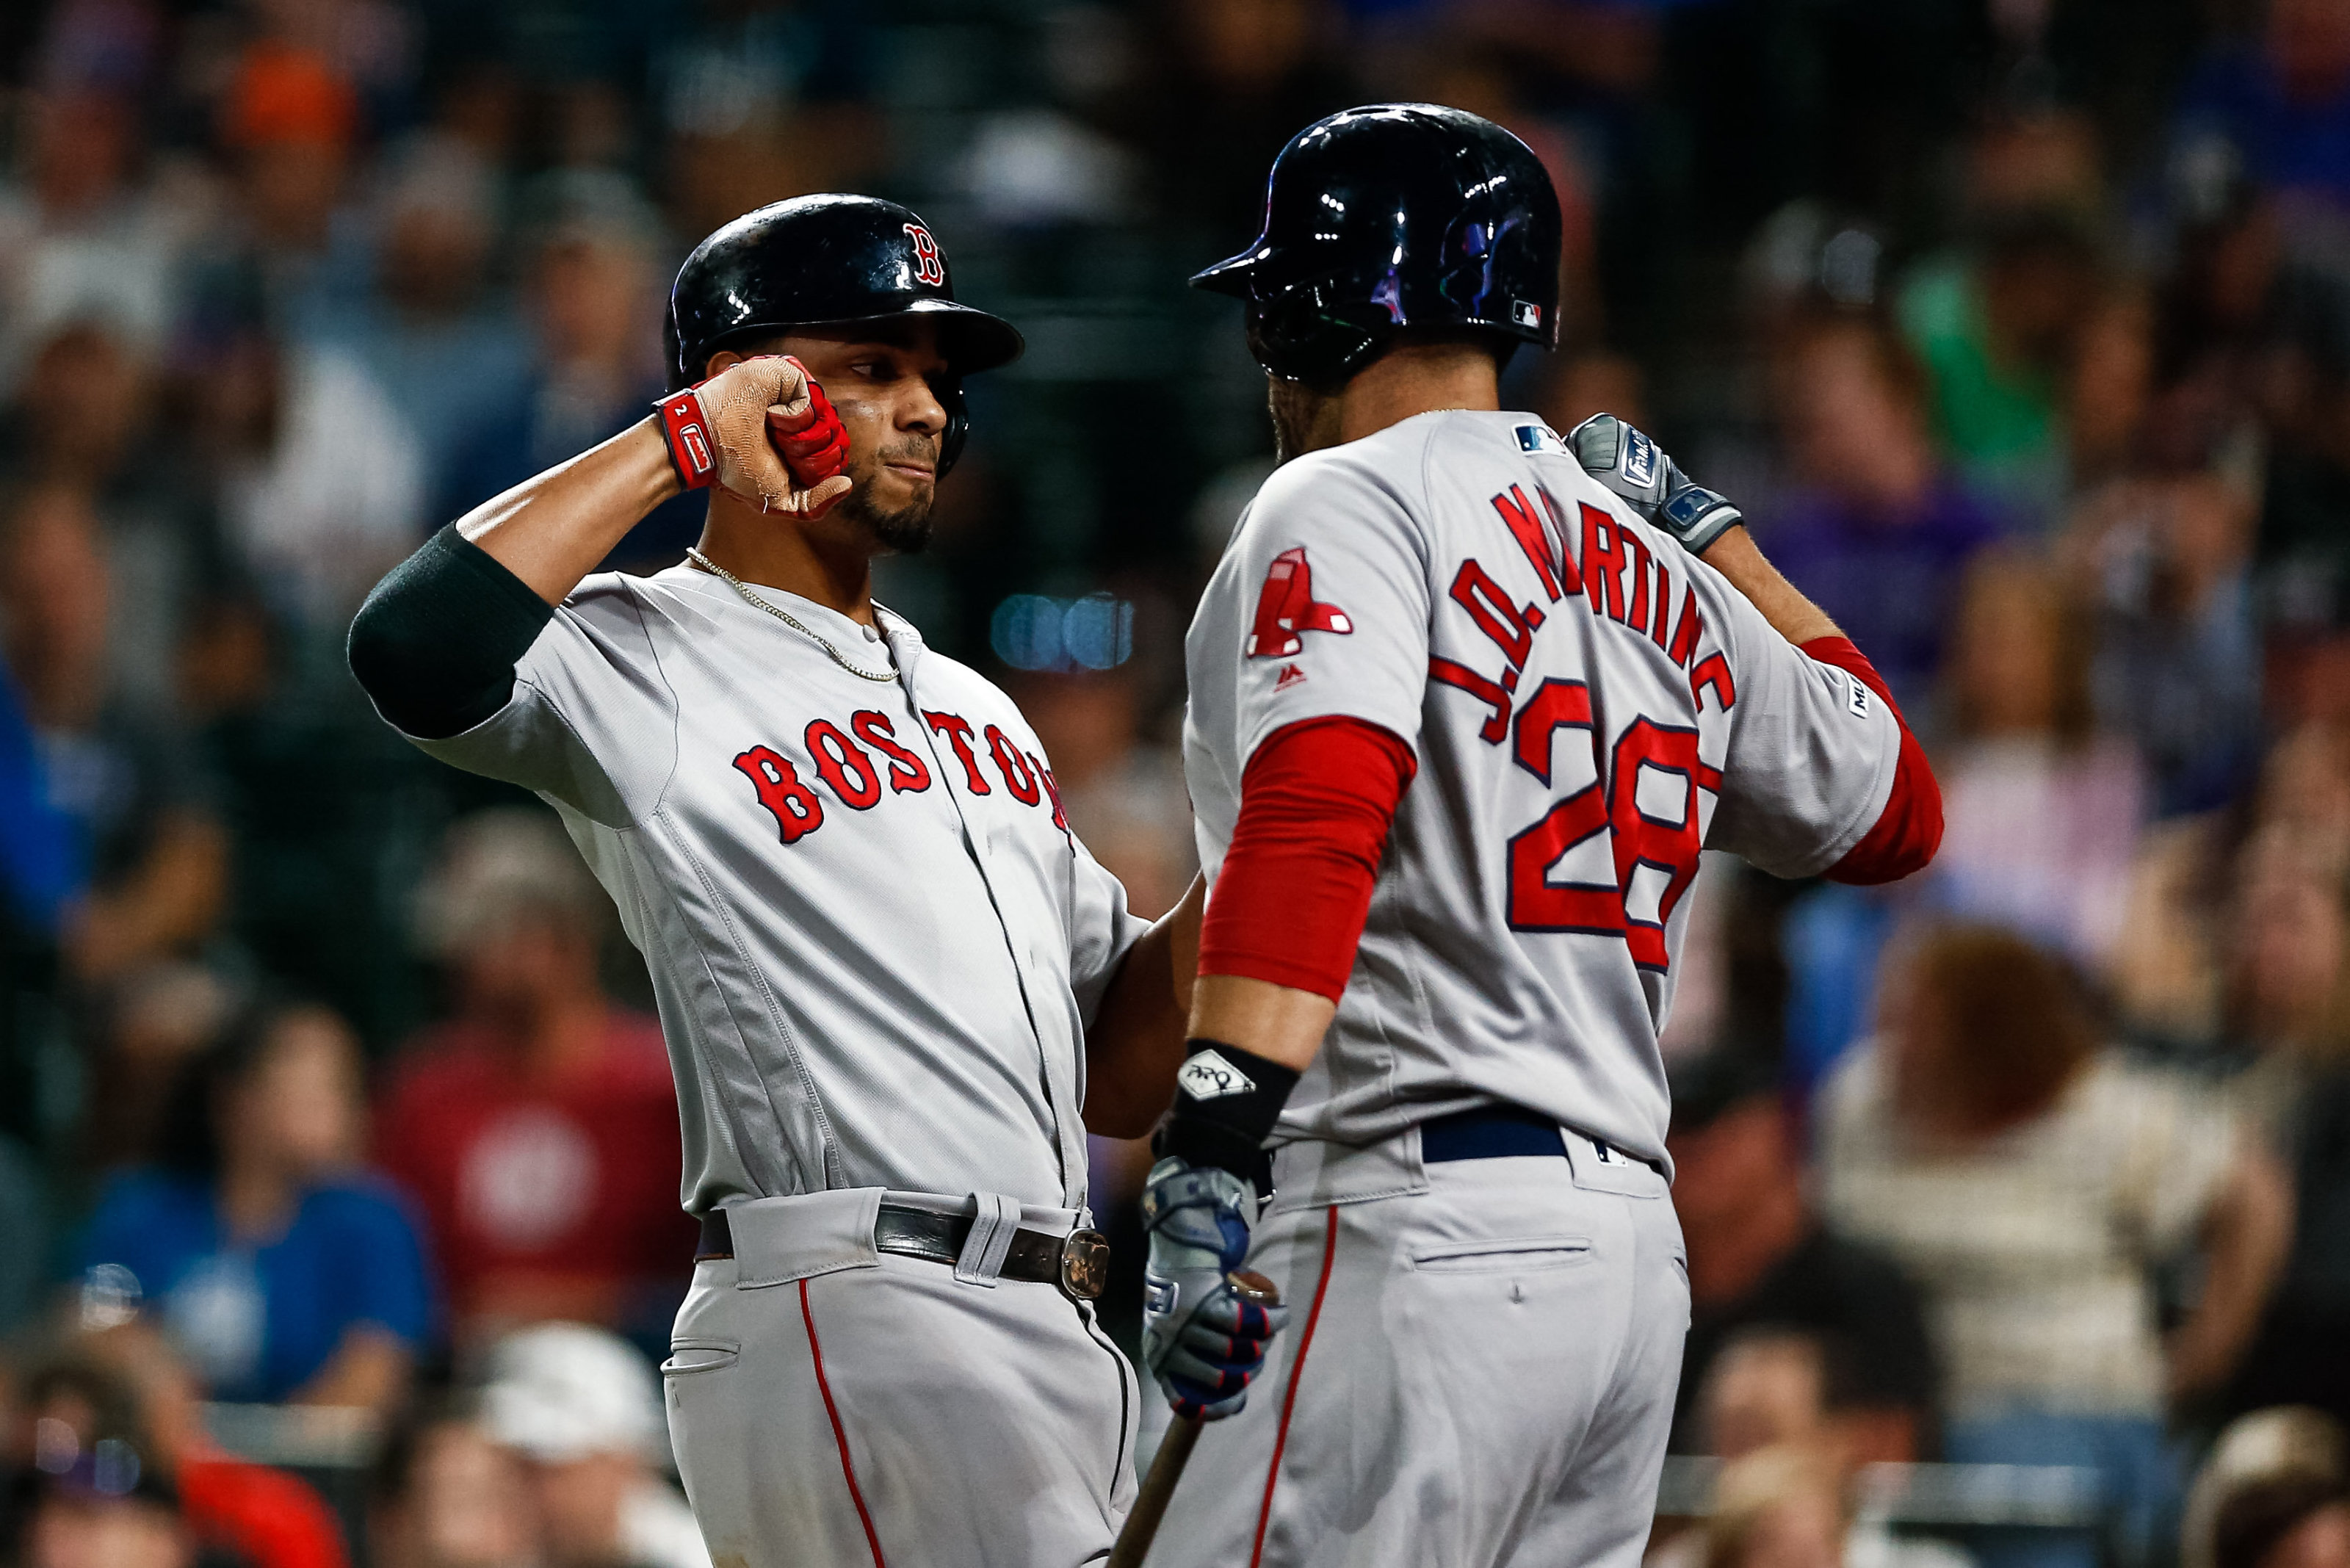 I. Introduction to the Boston Red Sox